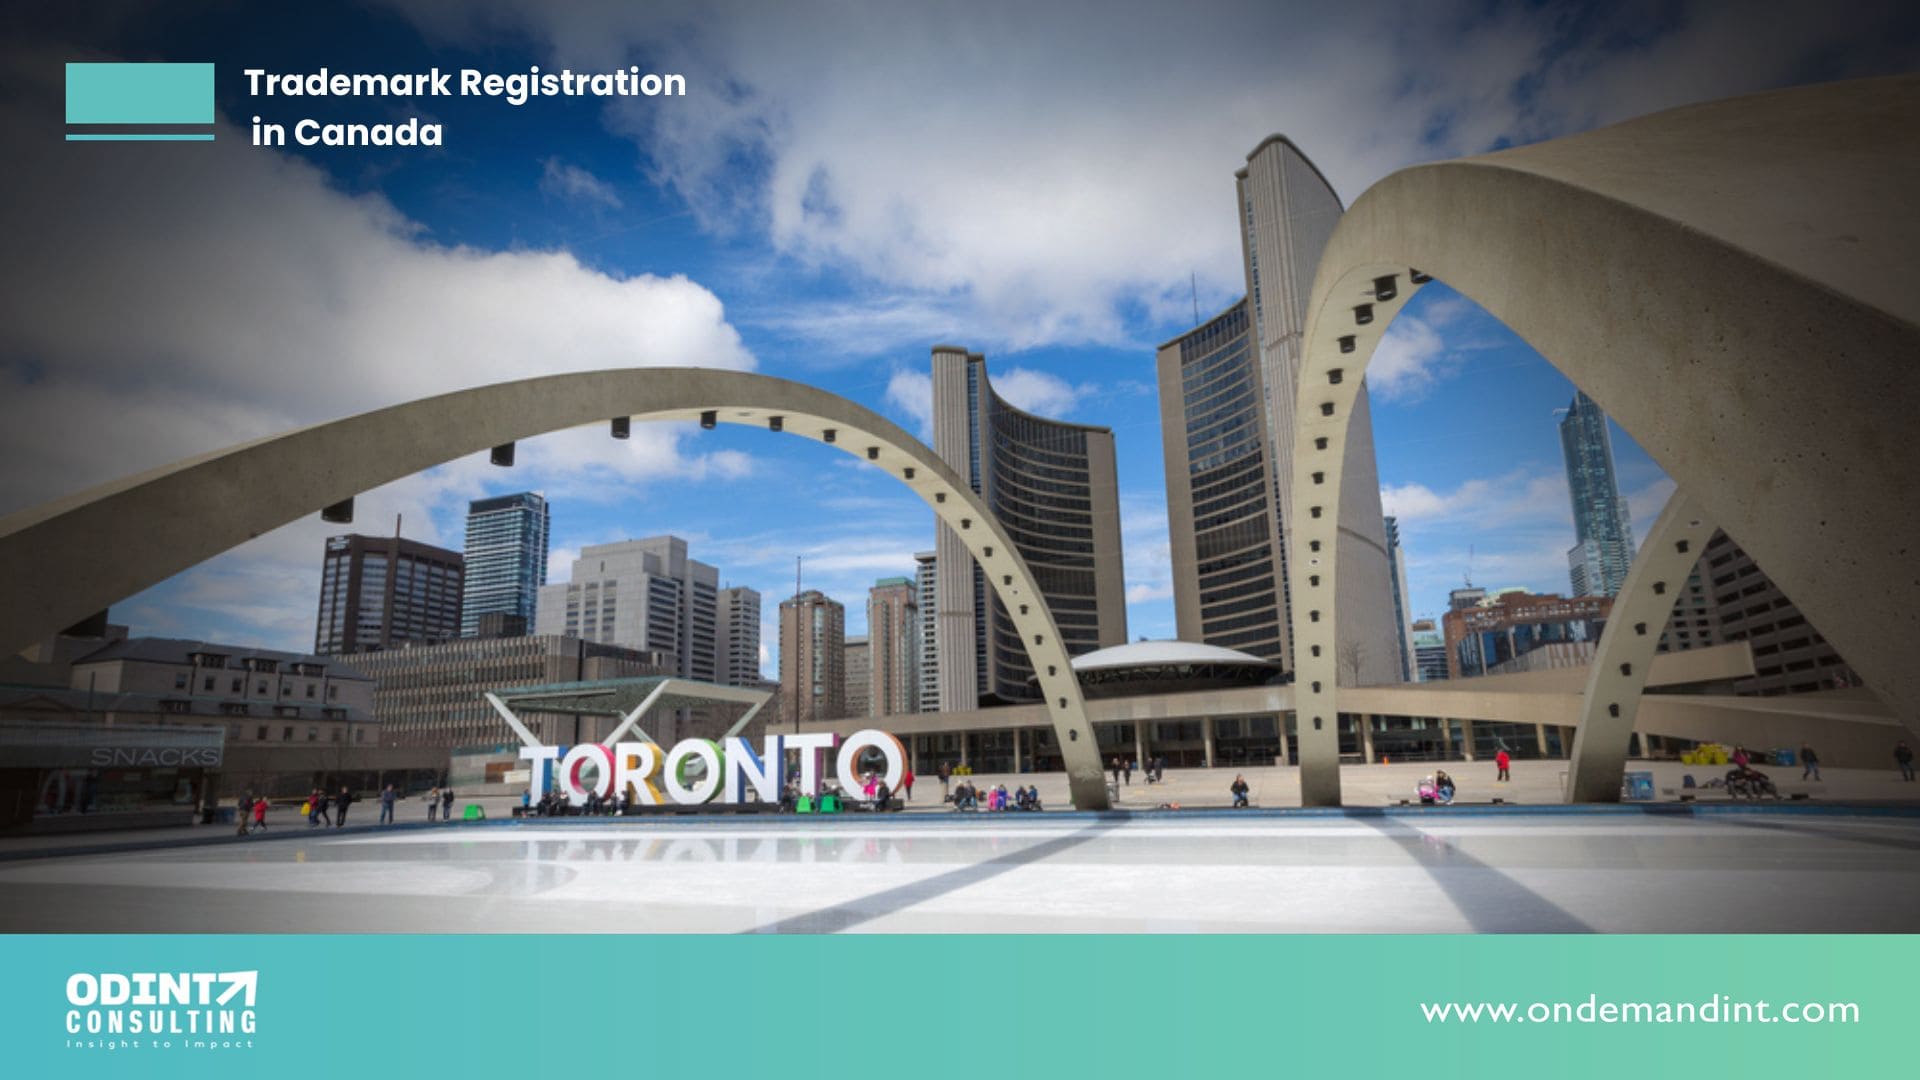 Trademark Registration in Canada: Types, Process & Benefits